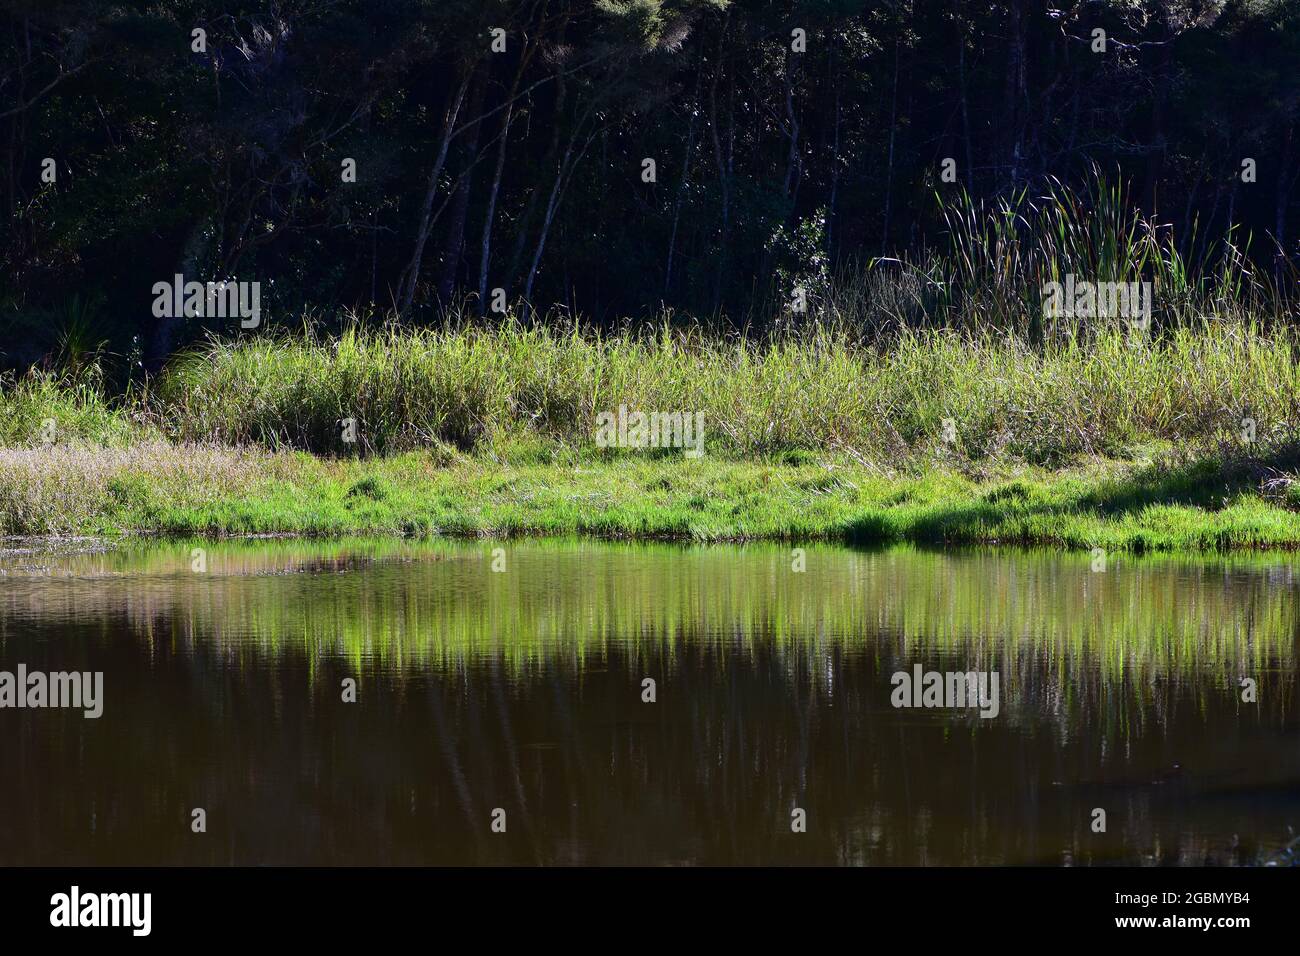 Grass on lake shore reflecting on calm surface on bright sunny day. Stock Photo